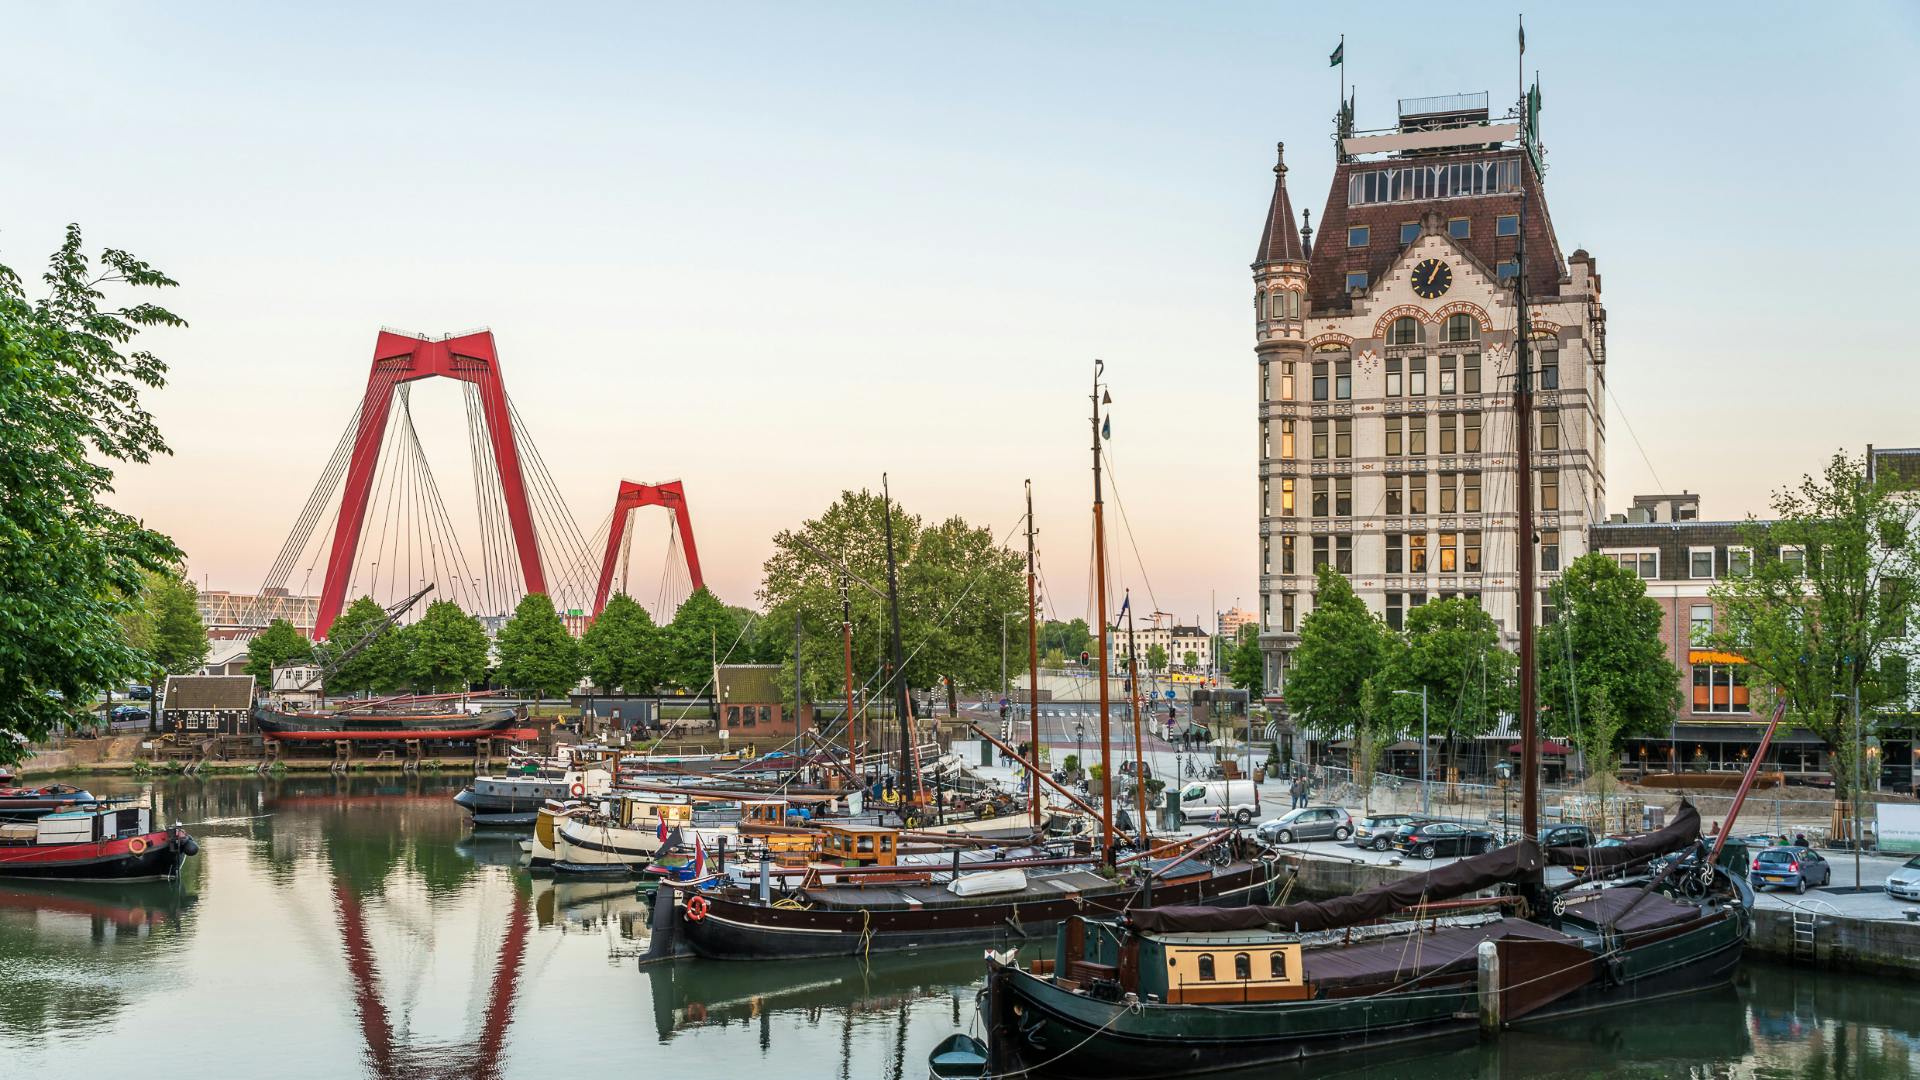 Self-guided discovery walk of Rotterdam's sights and secrets